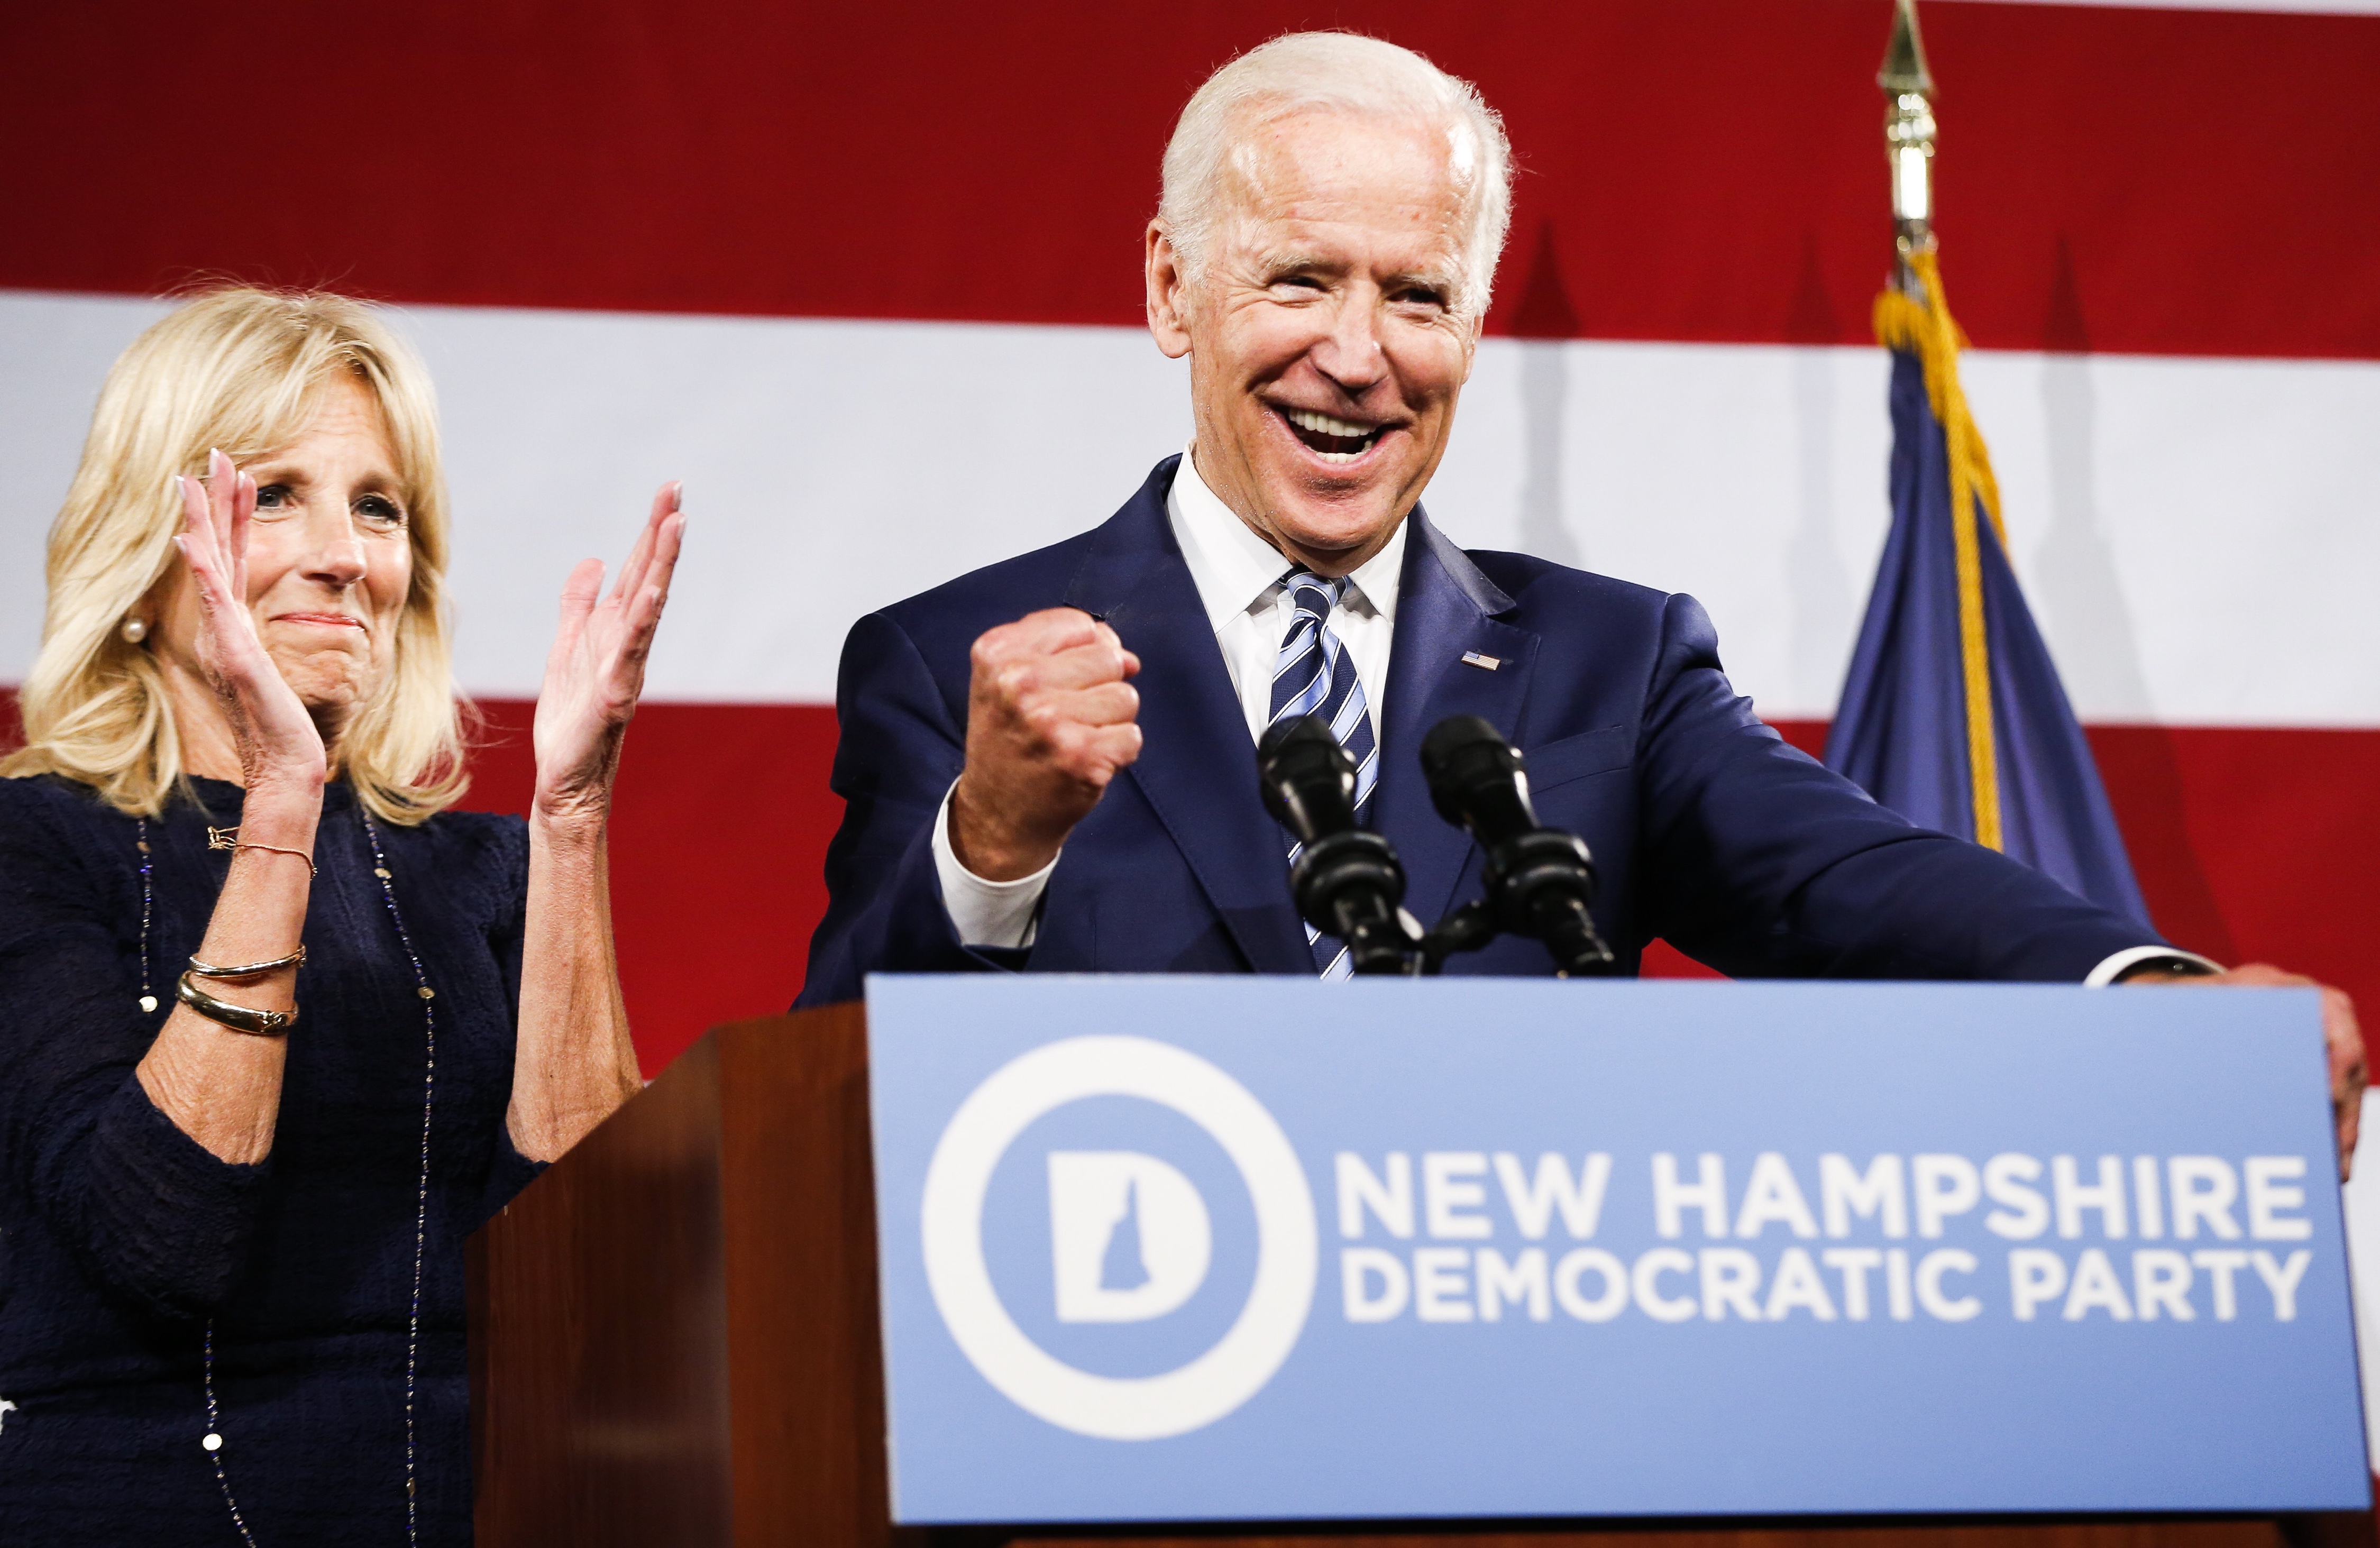 Jill Biden claps as former U.S. Vice President Joe Biden speaks during the annual fund-raising dinner for New Hampshire Democrats in Manchester, NH, on Apr. 30, 2017. (Keith Bedford&mdash;Boston Globe/Getty Images)